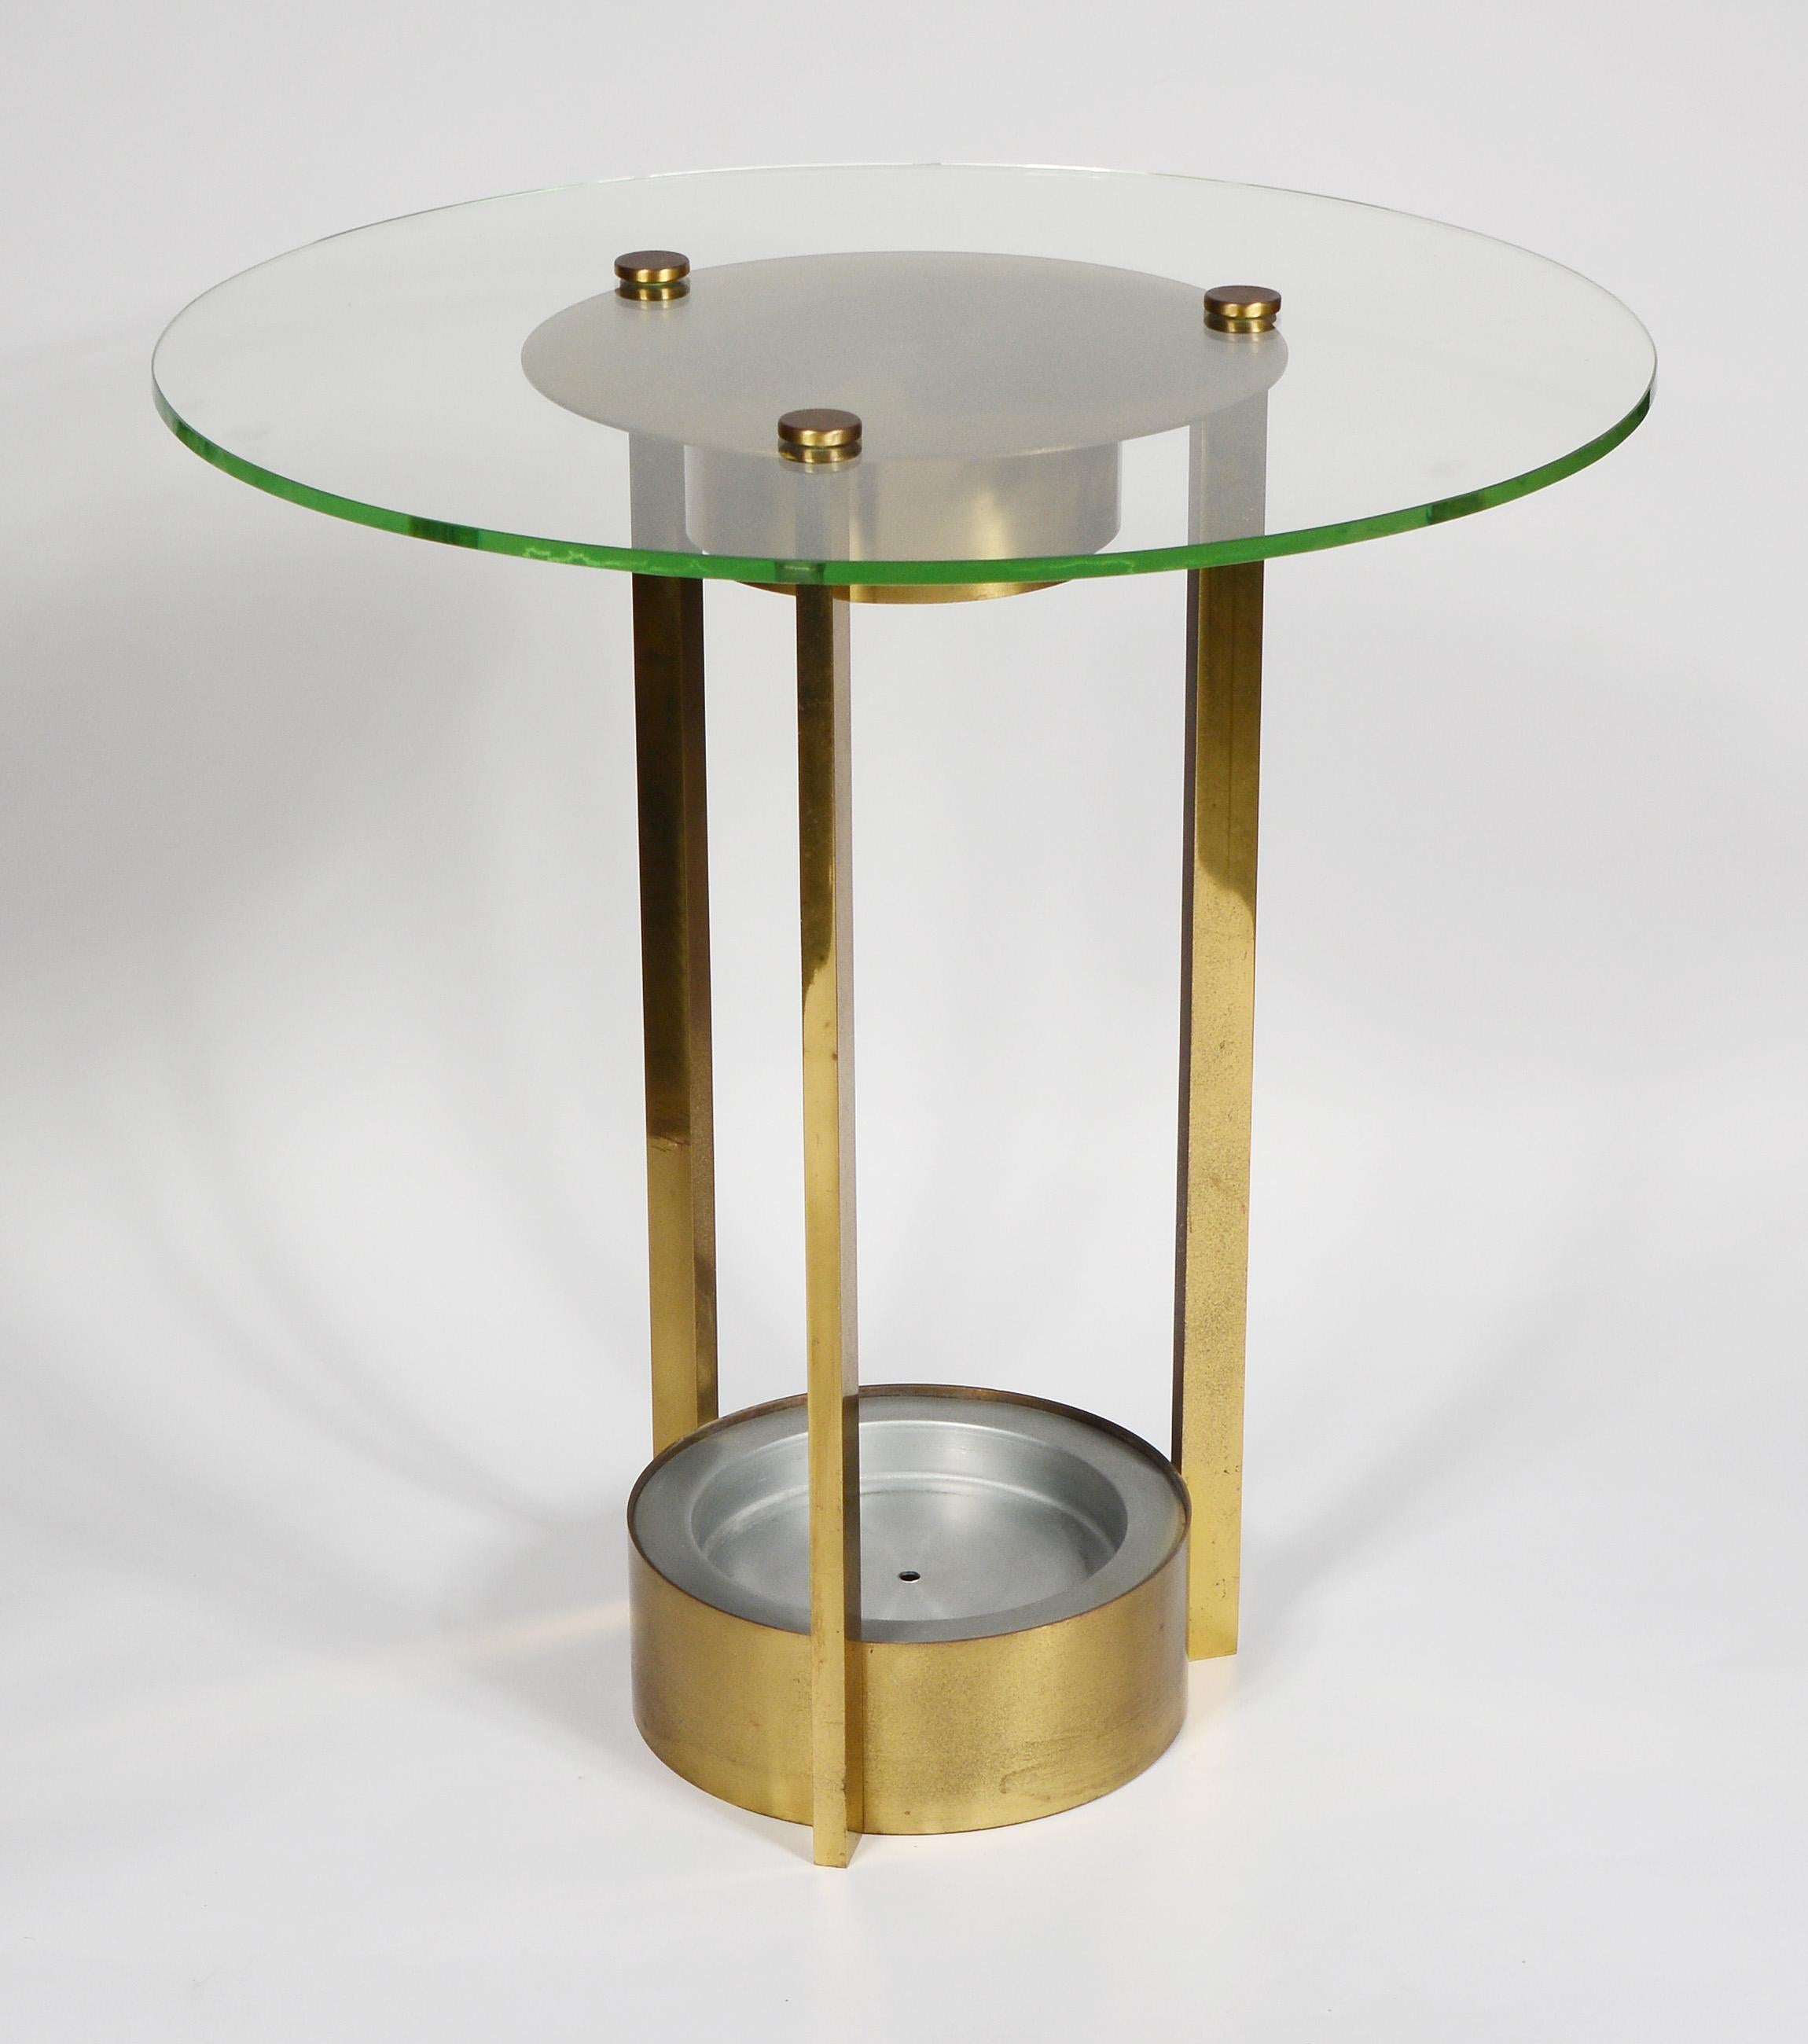 Modernist side table in brass with a glass top. This table has a small bulb in the underside of the top to illuminate any object placed in the base. This had a glass cylinder vase in the originally. The top is the original pale green glass. There is